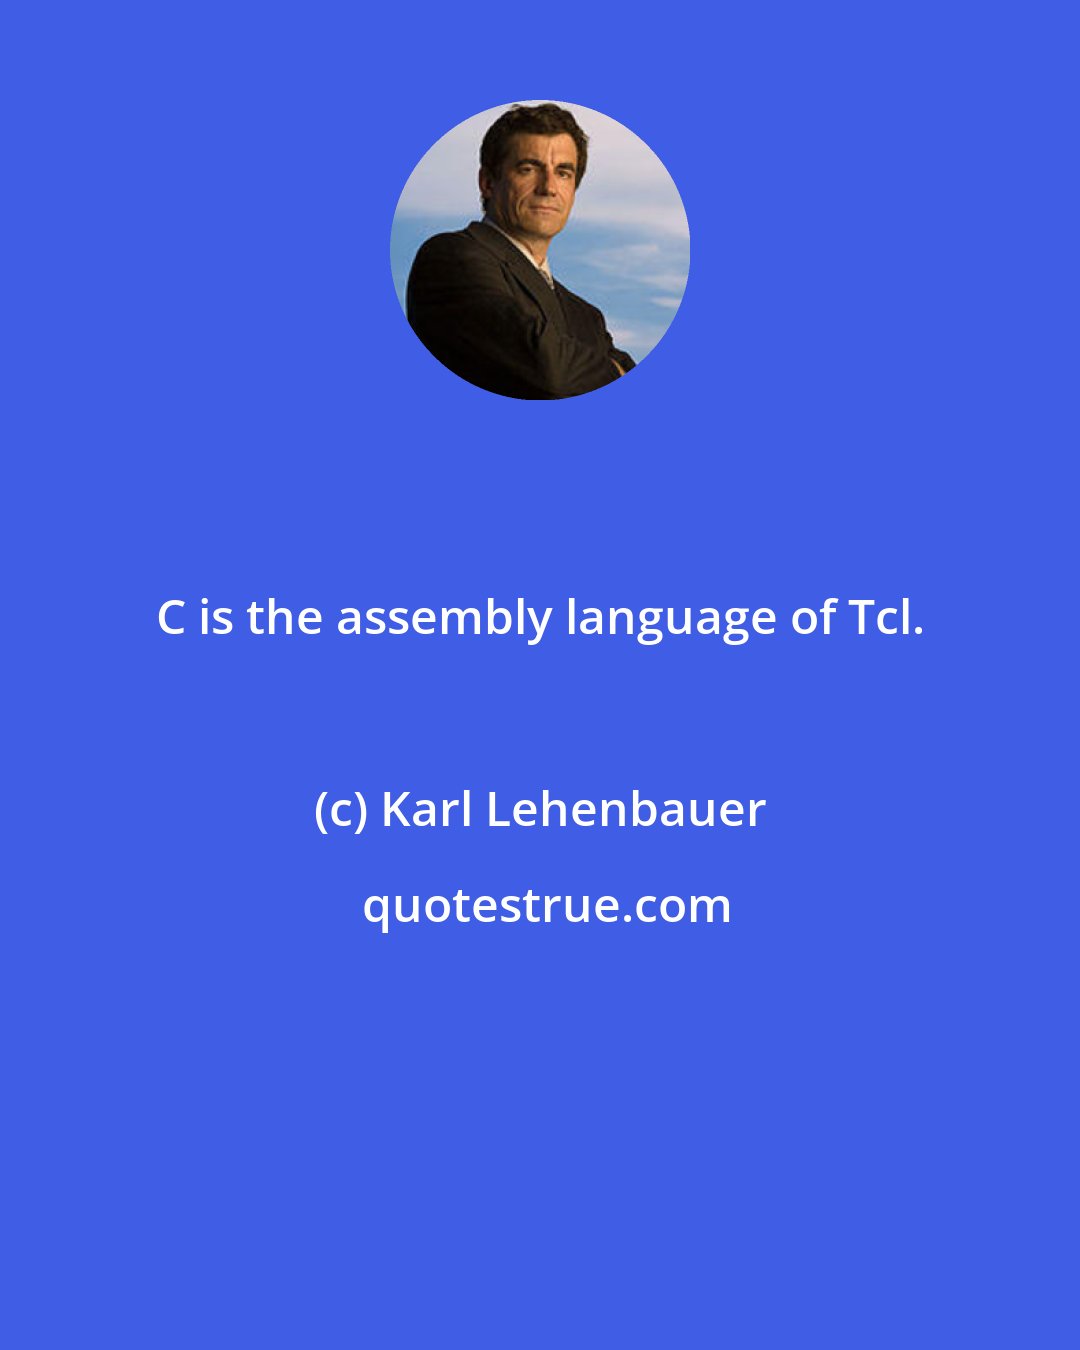 Karl Lehenbauer: C is the assembly language of Tcl.